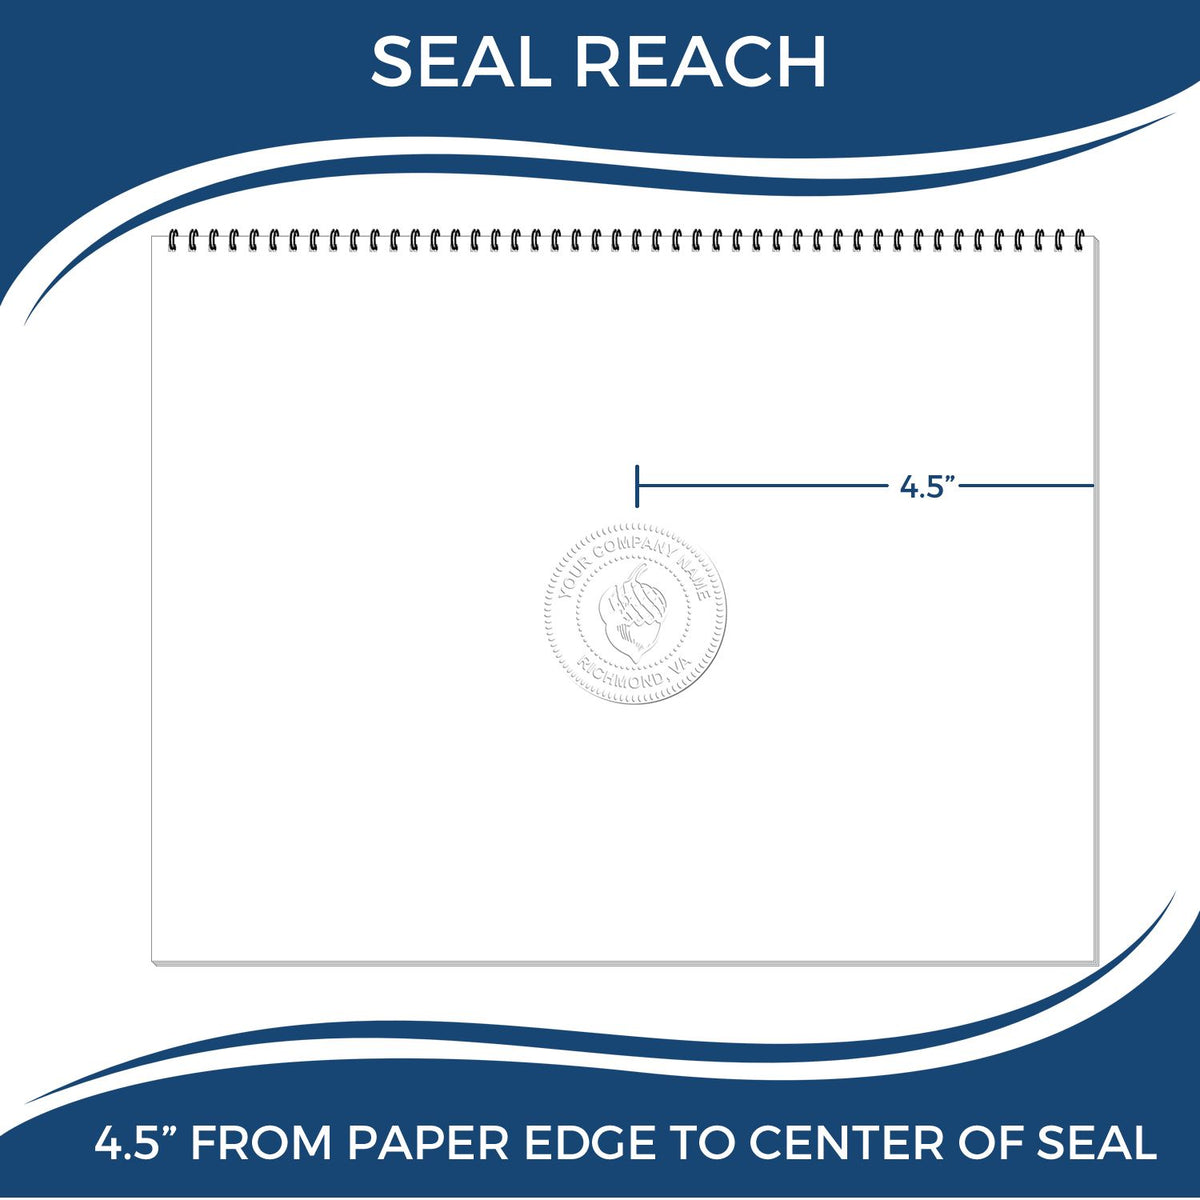 An infographic showing the seal reach which is represented by a ruler and a miniature seal image of the State of Missouri Extended Long Reach Engineer Seal